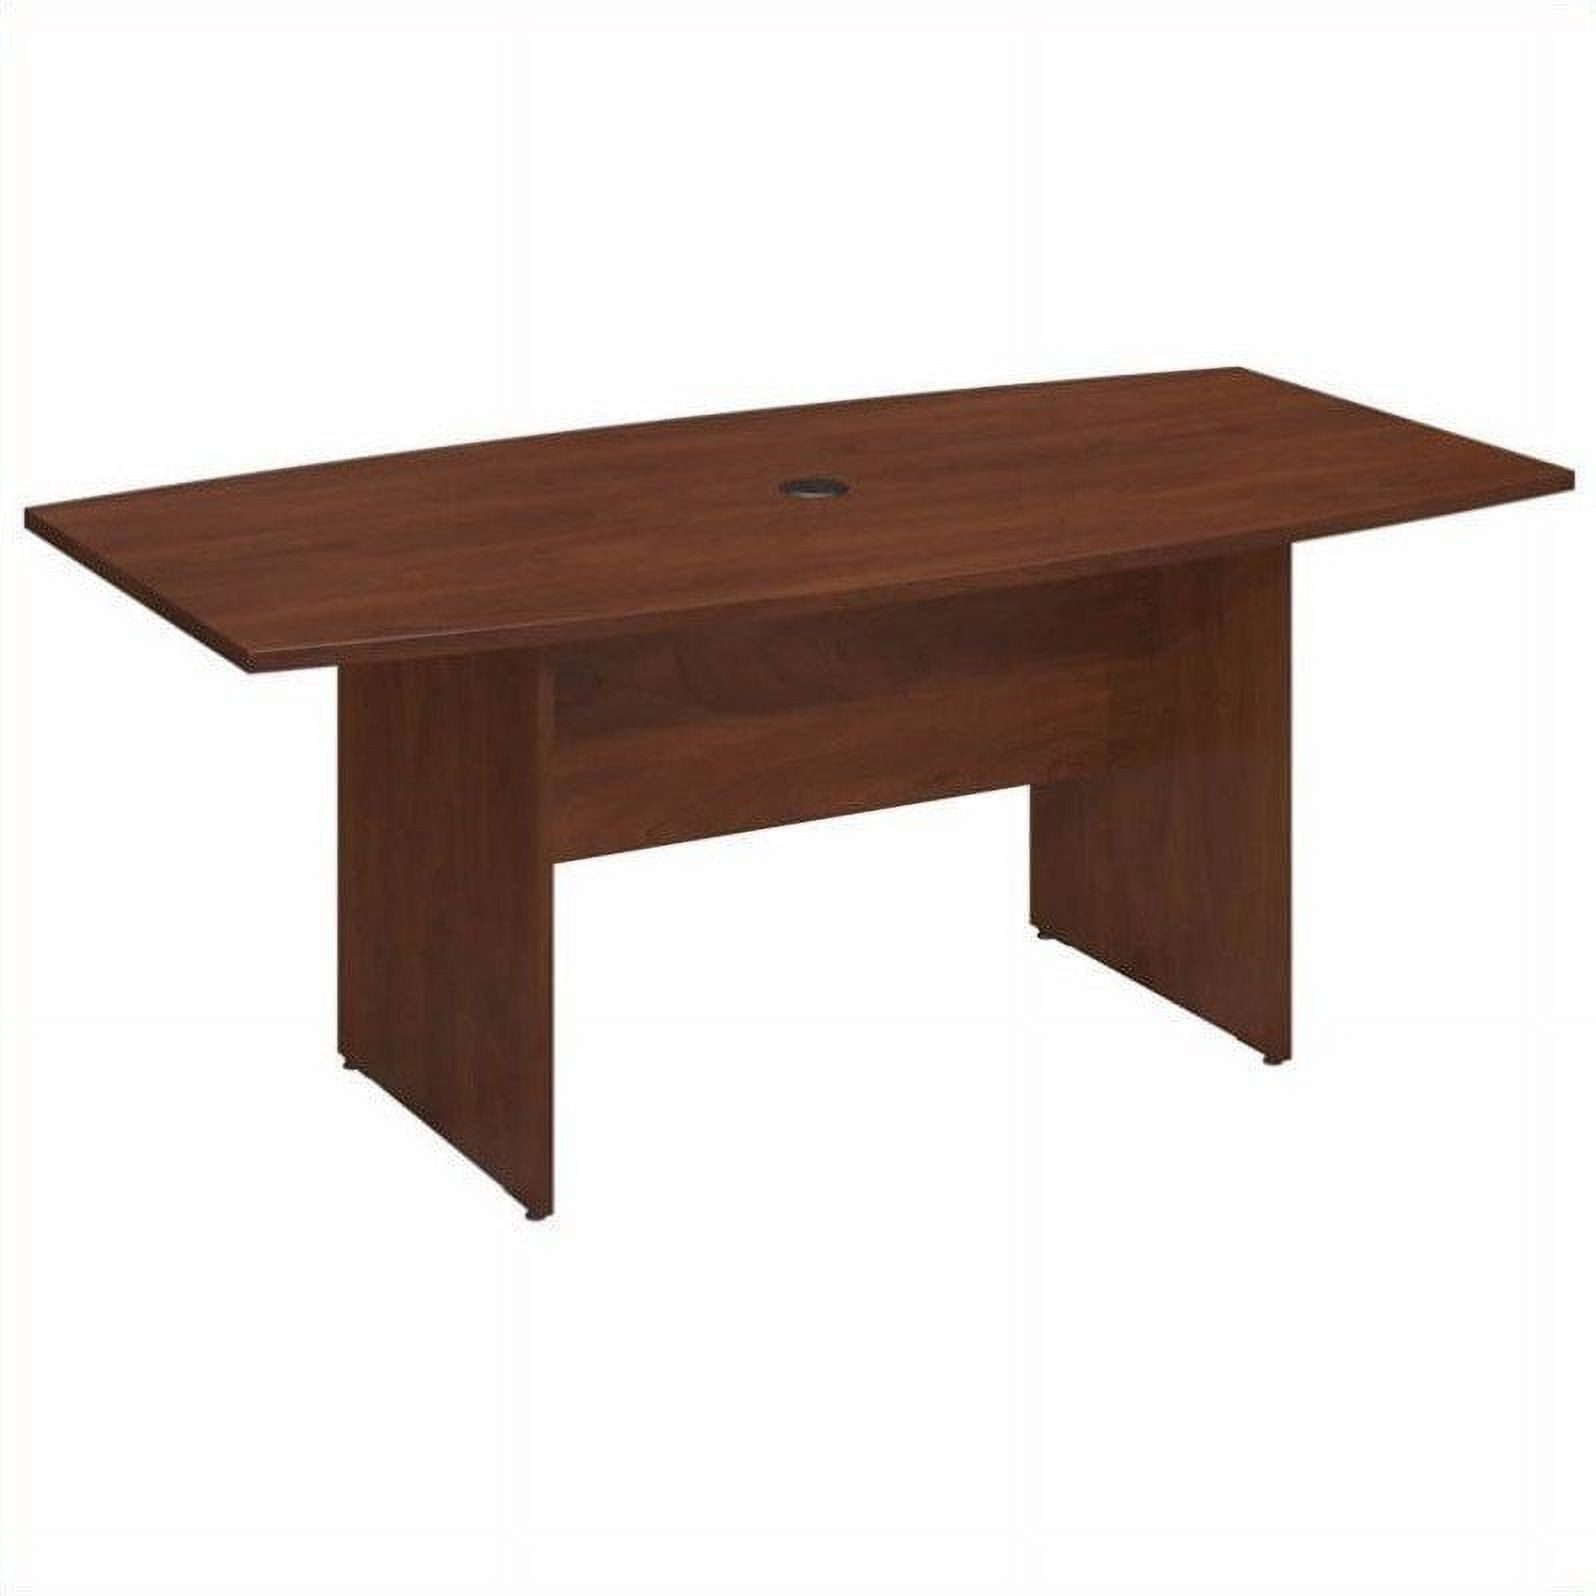 Picture of Bush Business Furniture 99TB7236HC 72 x 36 in. Boat Shaped Conference Table with Wood Base - Hansen Cherry